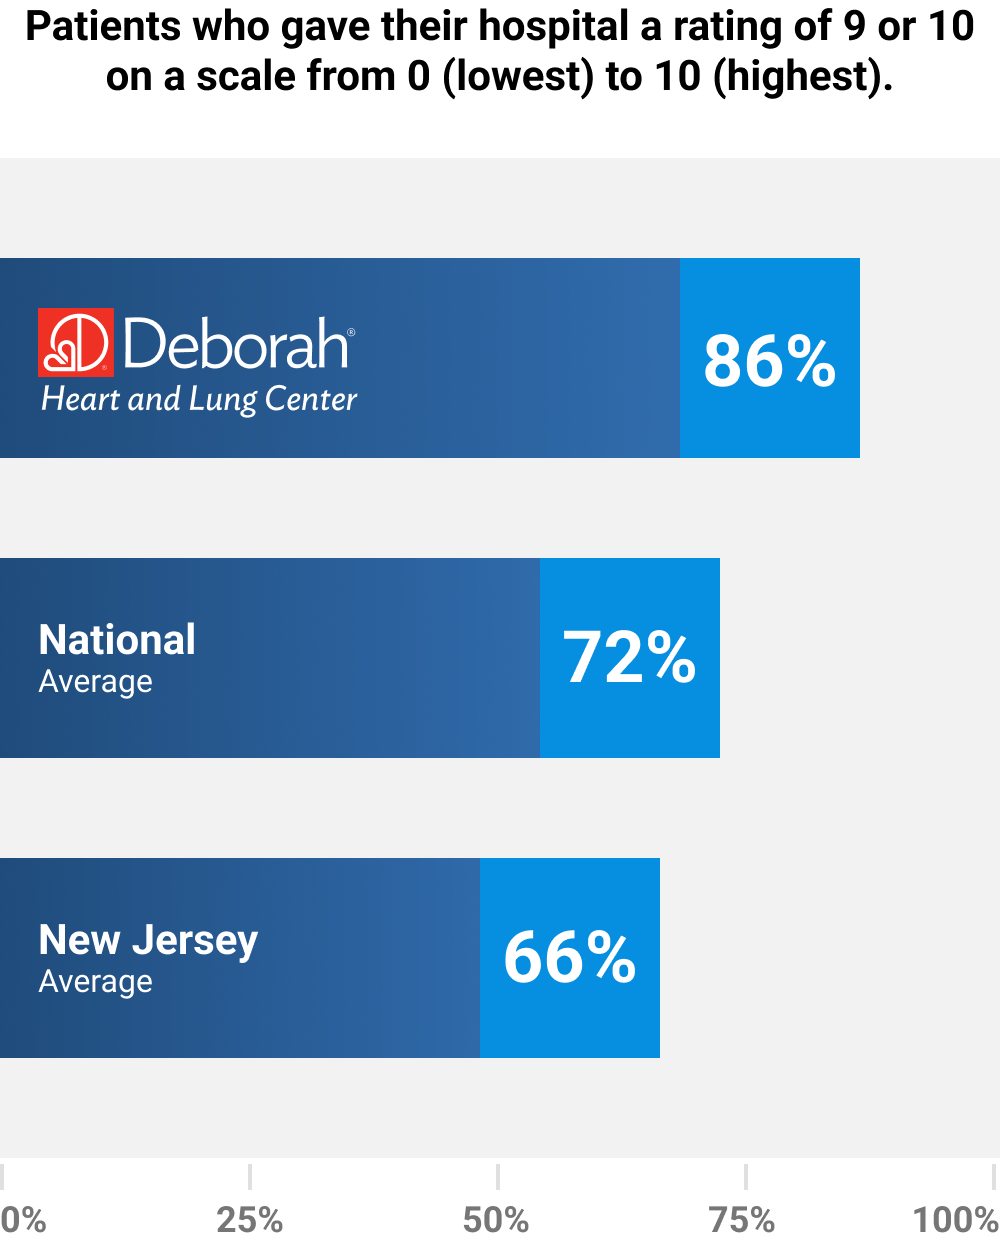 Patients who gave their hospital a rating of 9 or 10 on a scale from 0 (lowest) to 10 (highest). Deborah: 86%, National Average: 72%, New Jersey Average: 66%